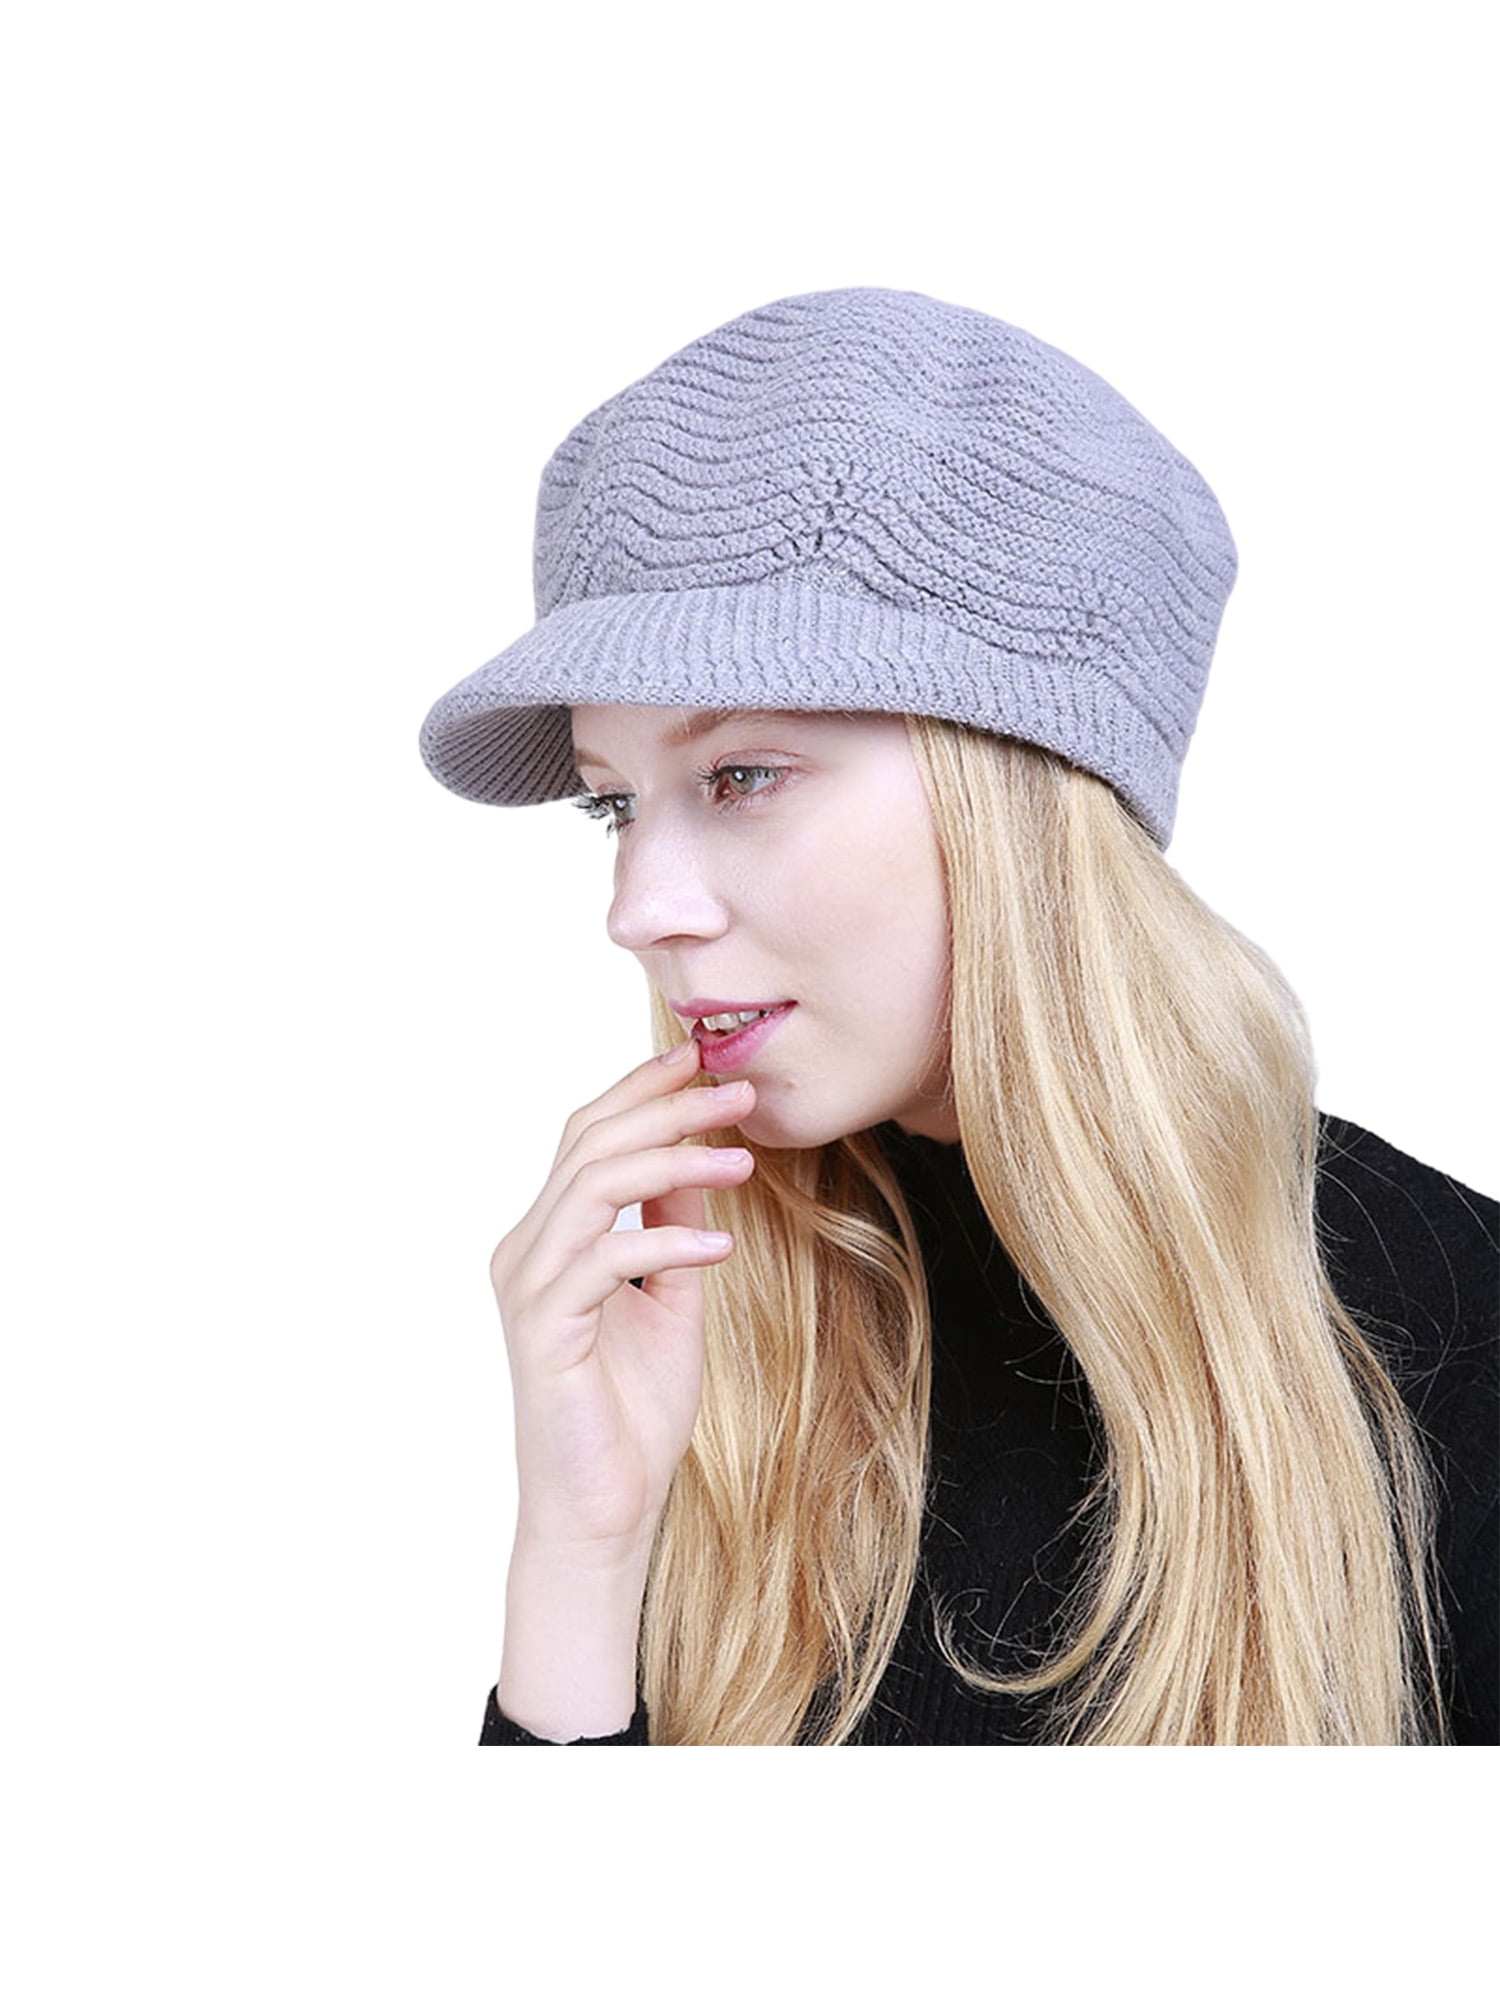 Gome-z Soft winter fashion hat blended knitted female hat Women Skullies Beanies outdoor leisure warm hat fashion ladies Gray White 